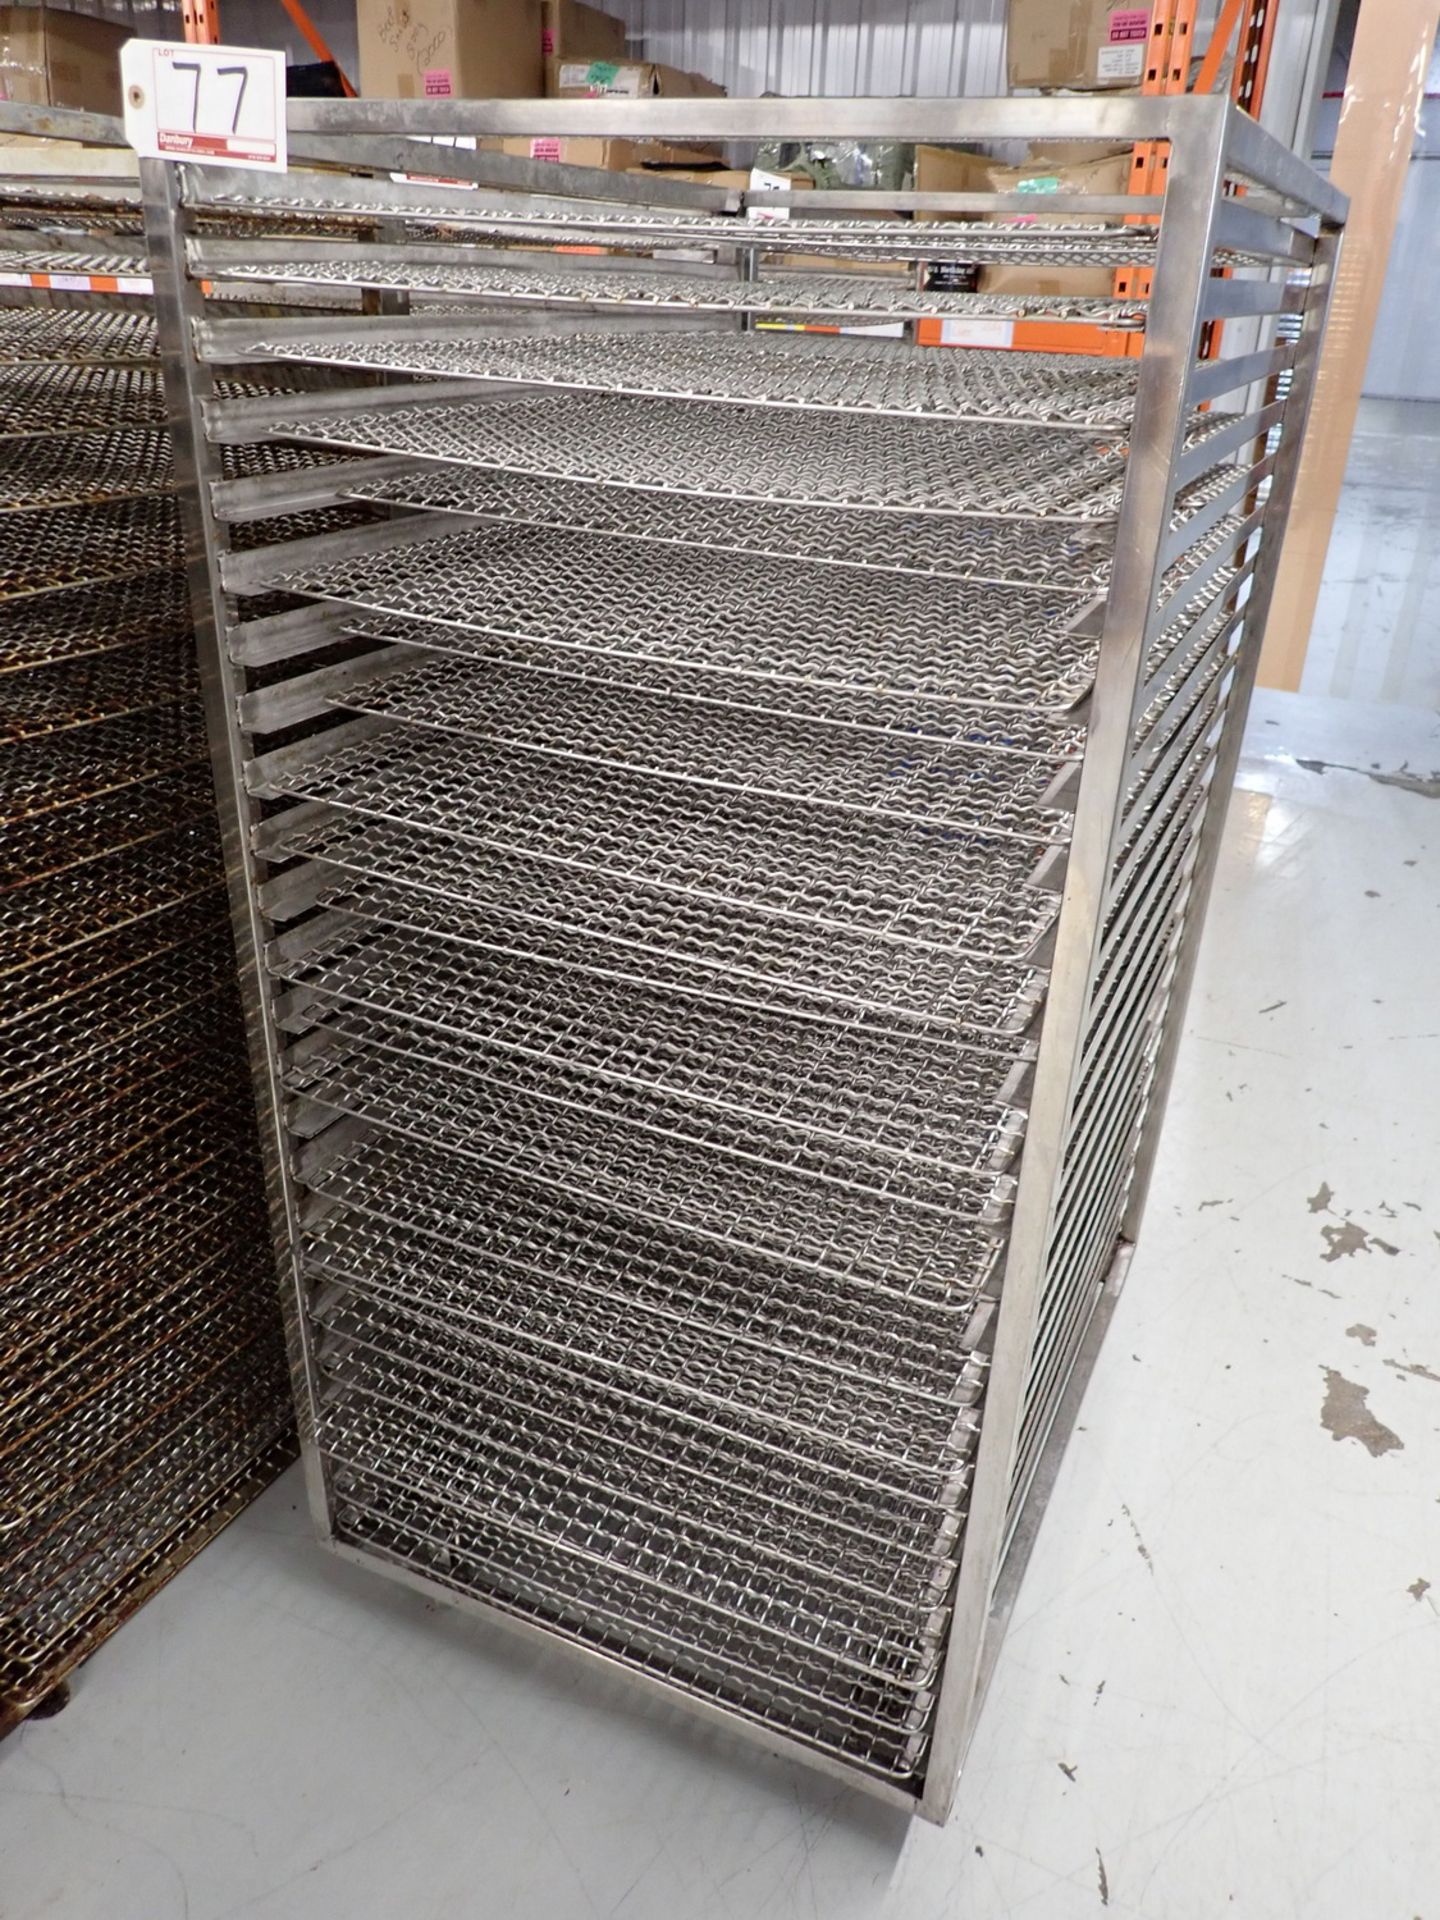 UNITS - STAINLESS STEEL DRYING RACKS C/W TRAYS - 37.5" X 28" X 57" - Image 2 of 2